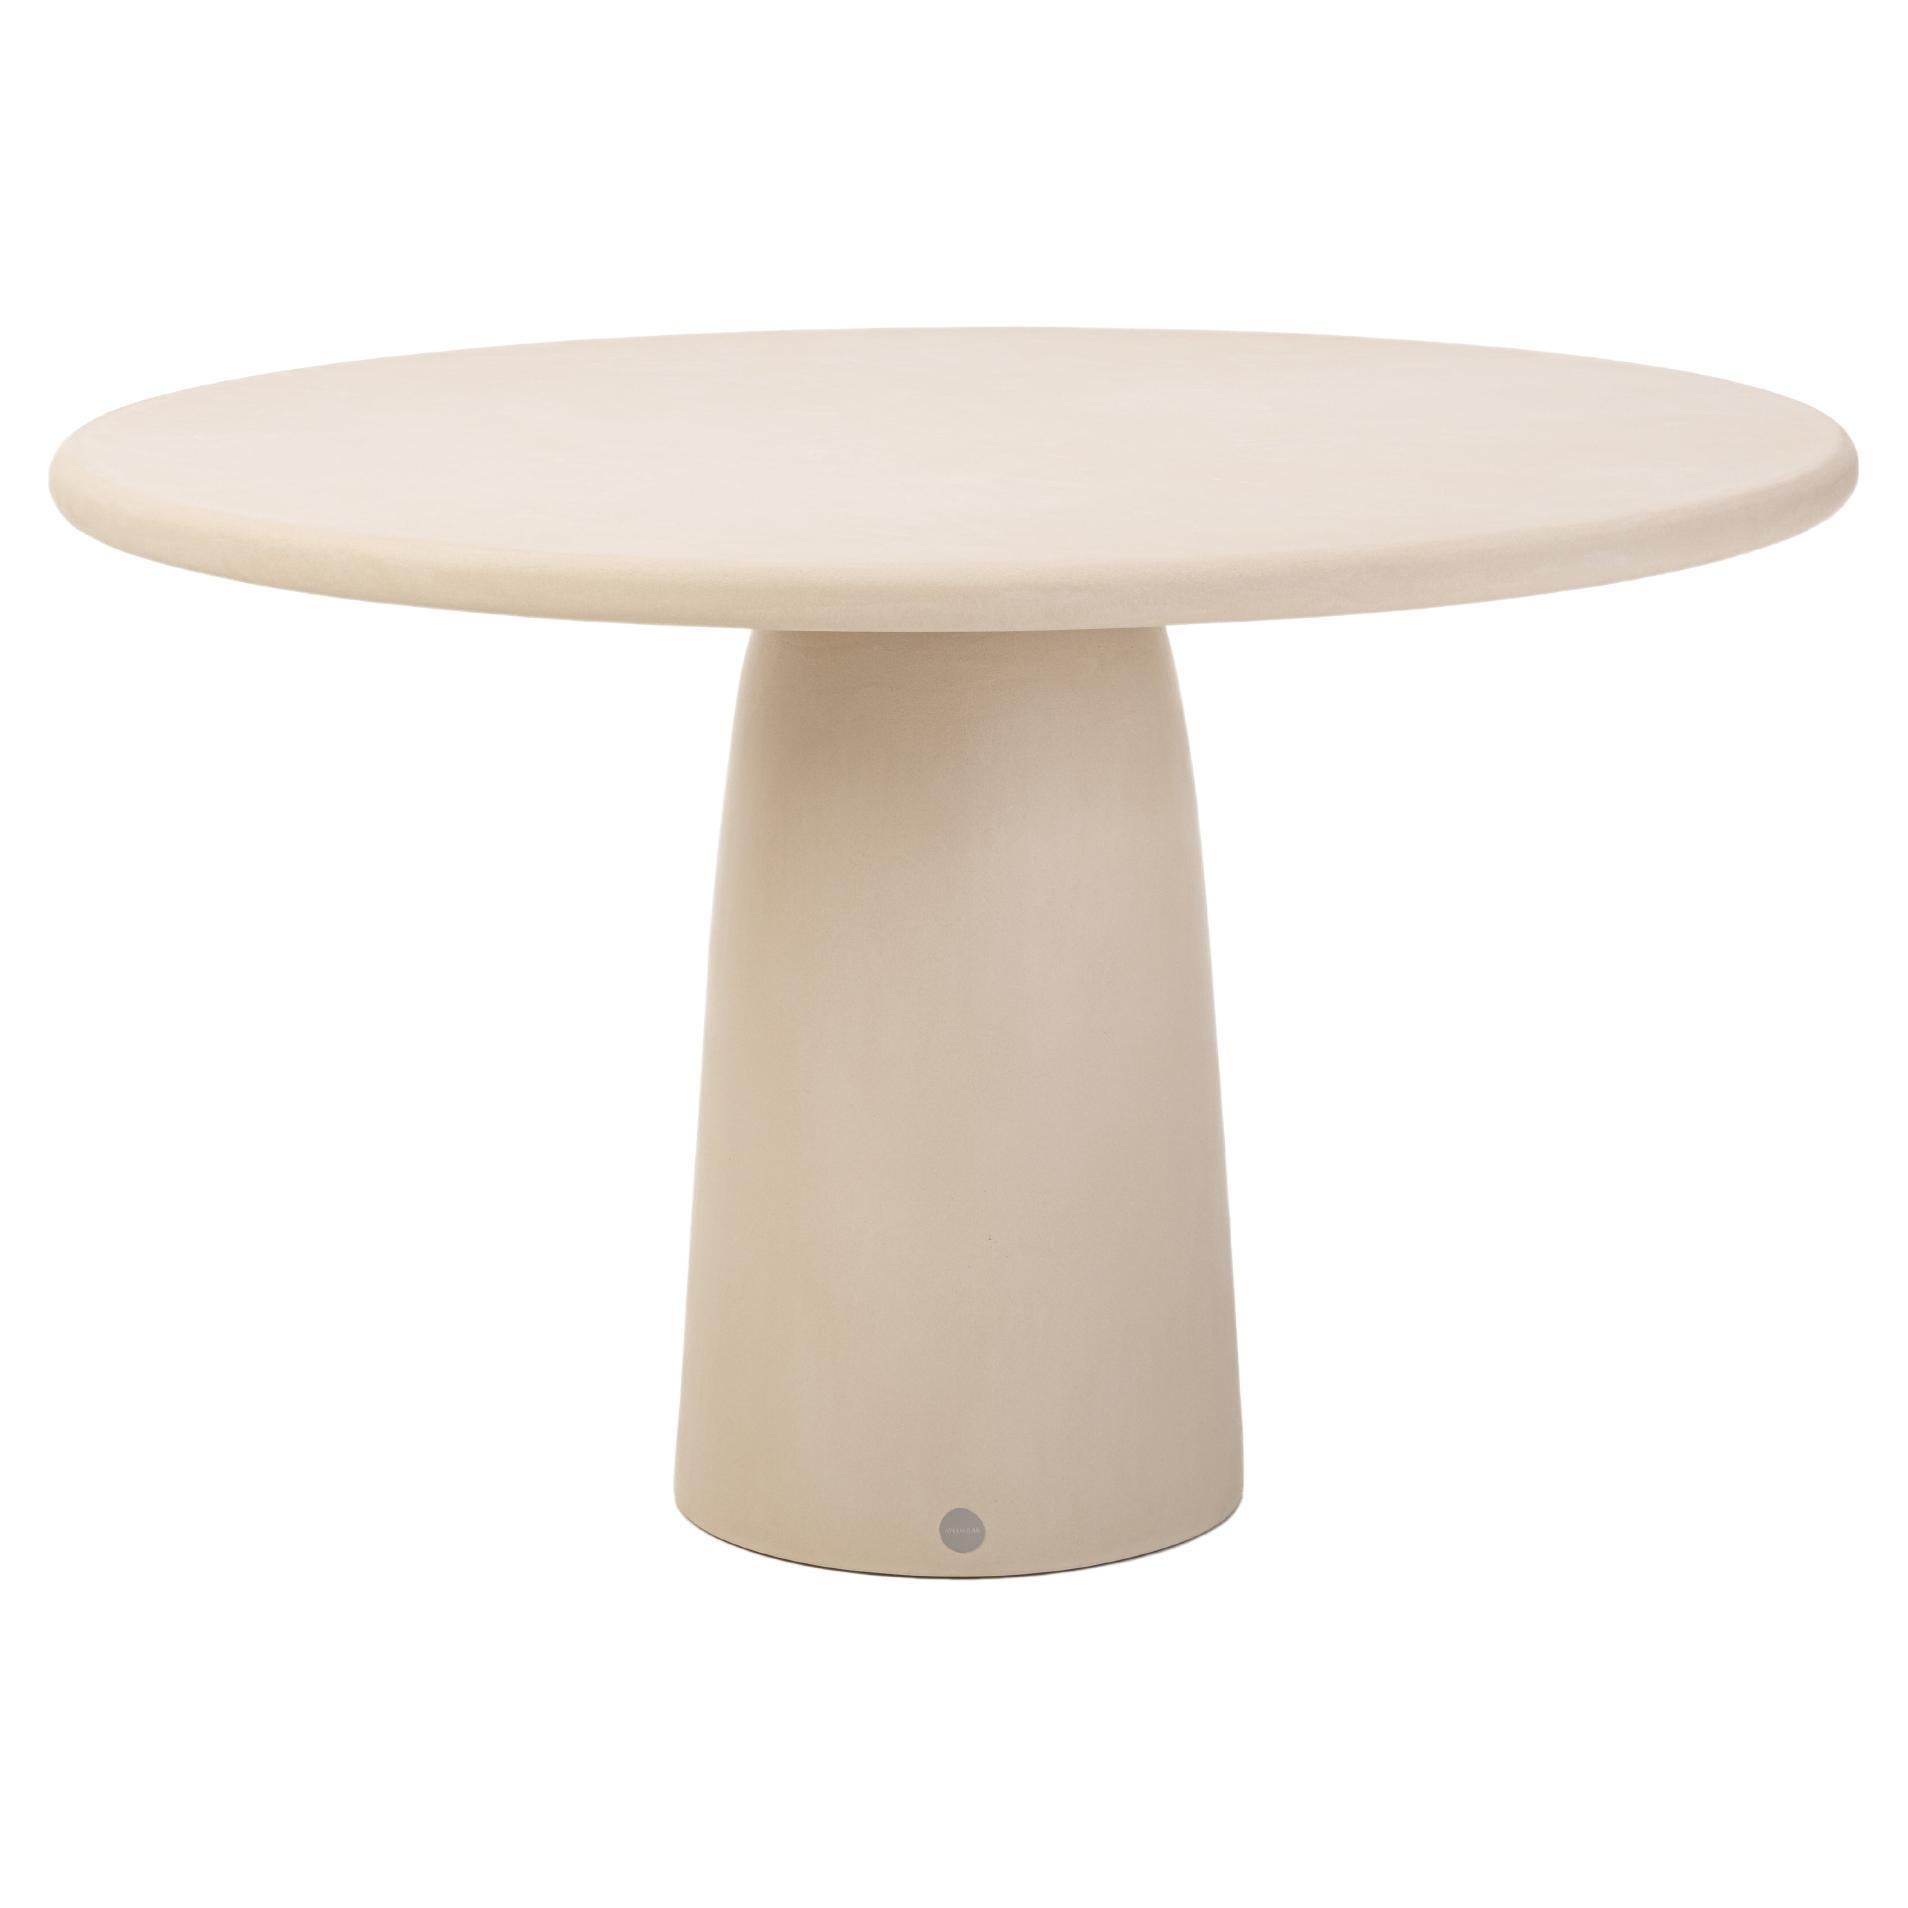 Contemporary Round Natural Plaster "Menhir" Table 120cm by Isabelle Beaumont